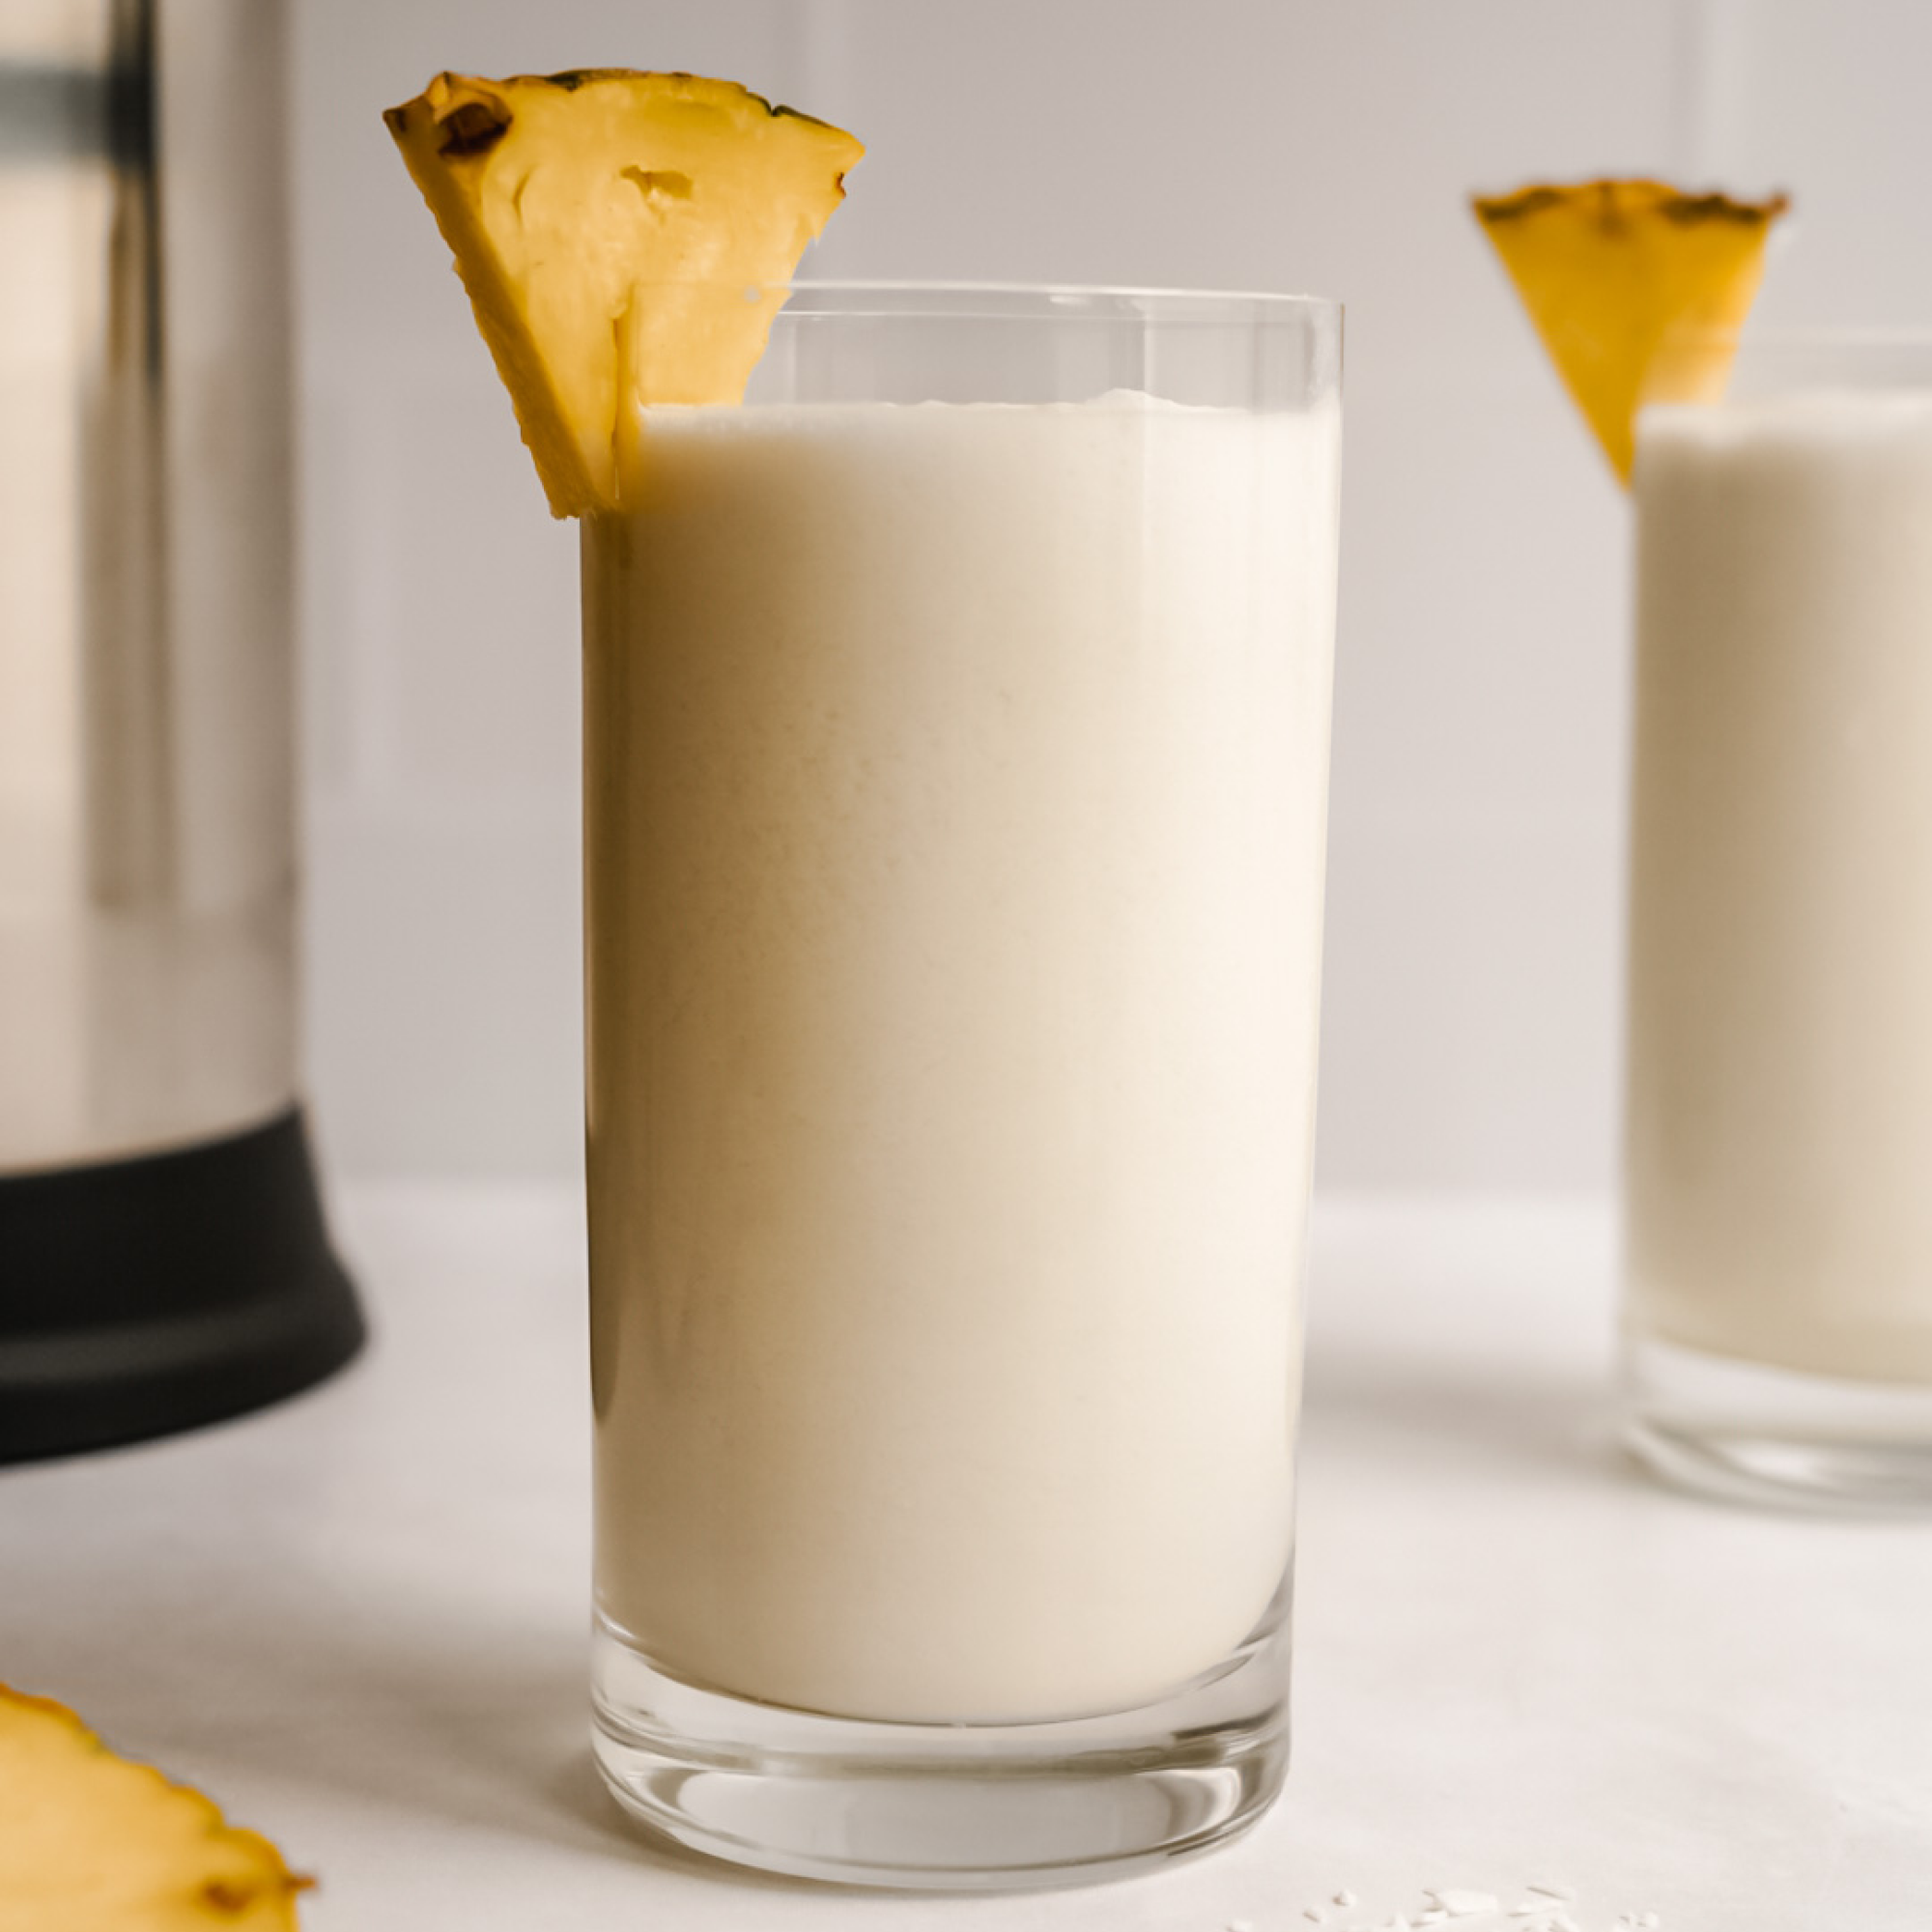 Pineapple Coconut Milk made in the Almond Cow.